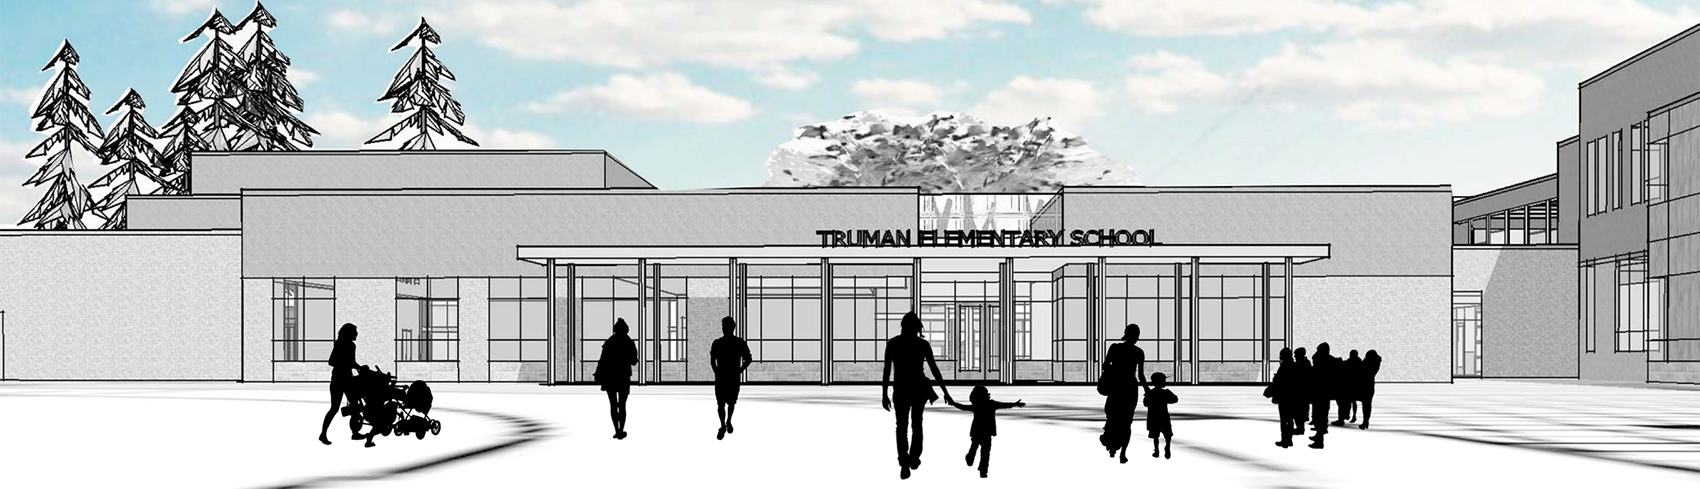 Rendering of the design for the new Truman Elementary